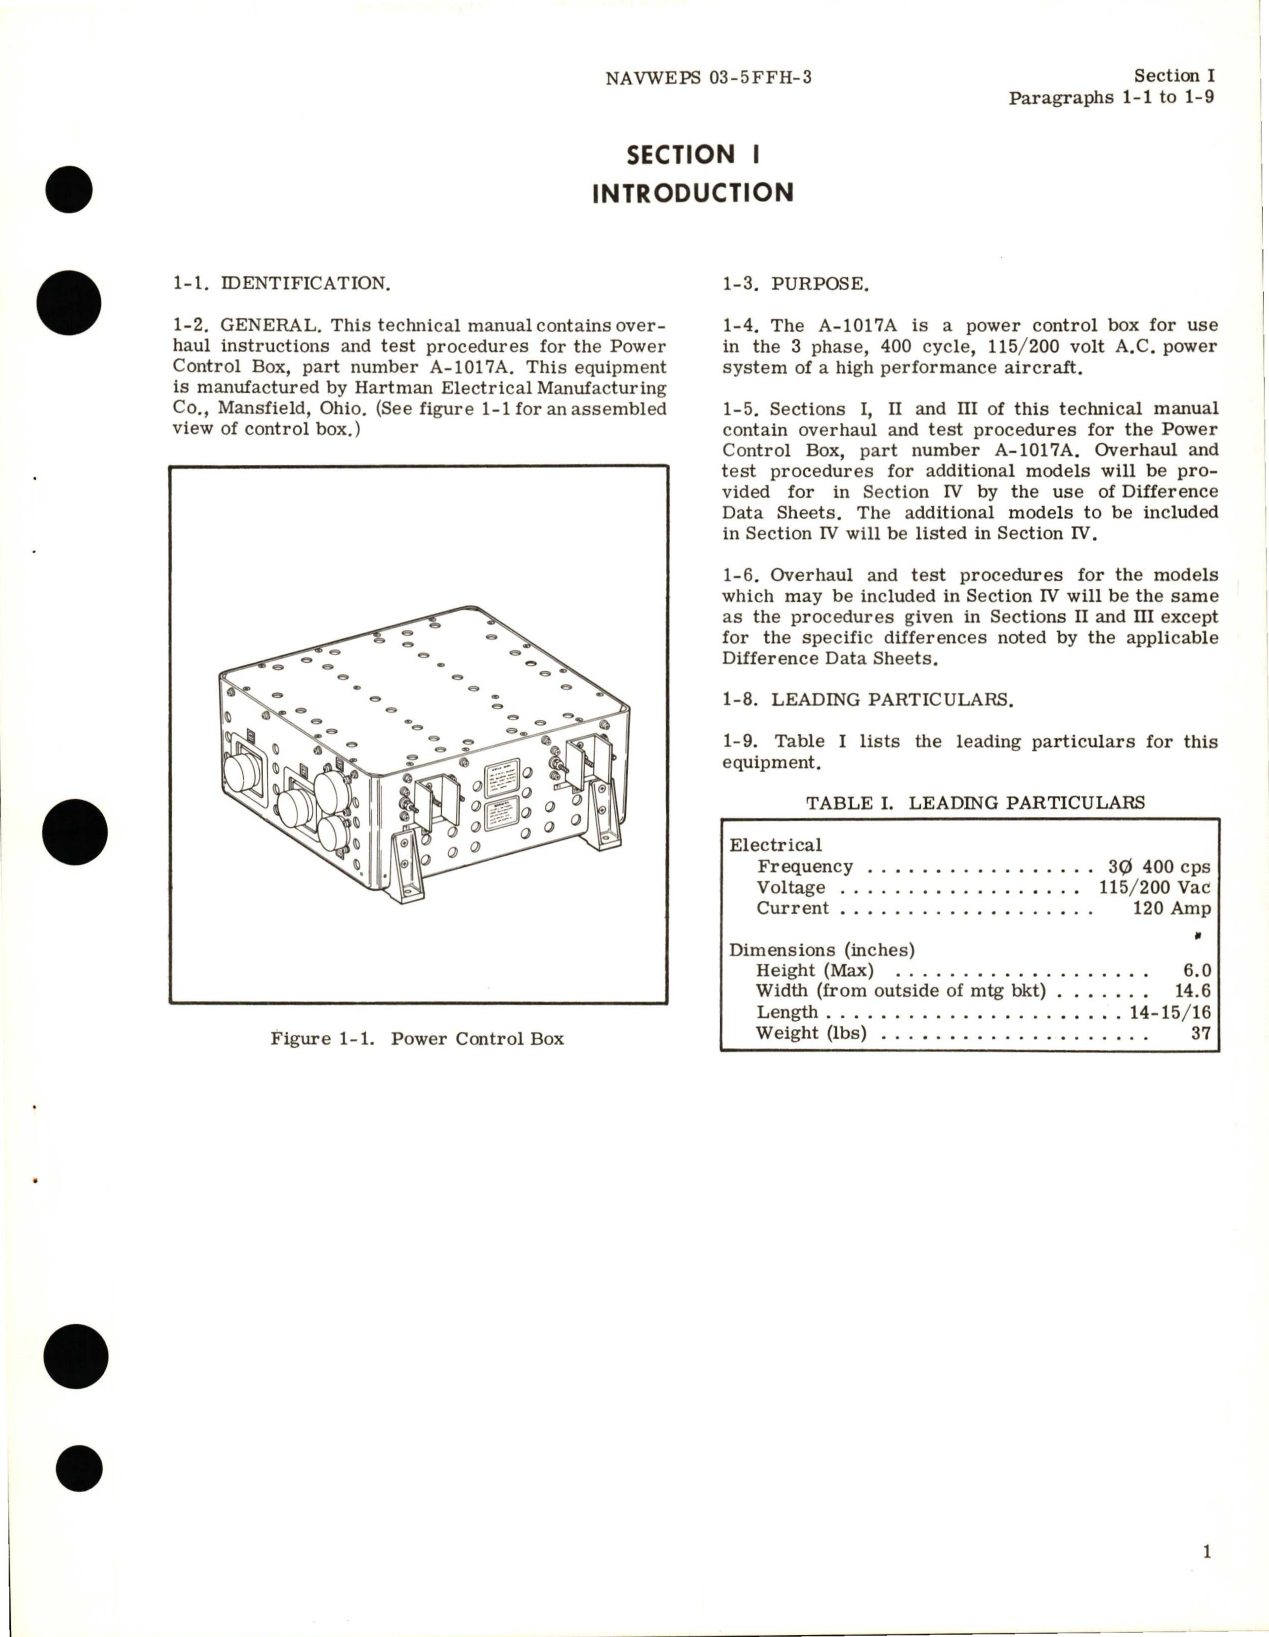 Sample page 5 from AirCorps Library document: Overhaul Instructions for Power Control Box - Part A-1017A